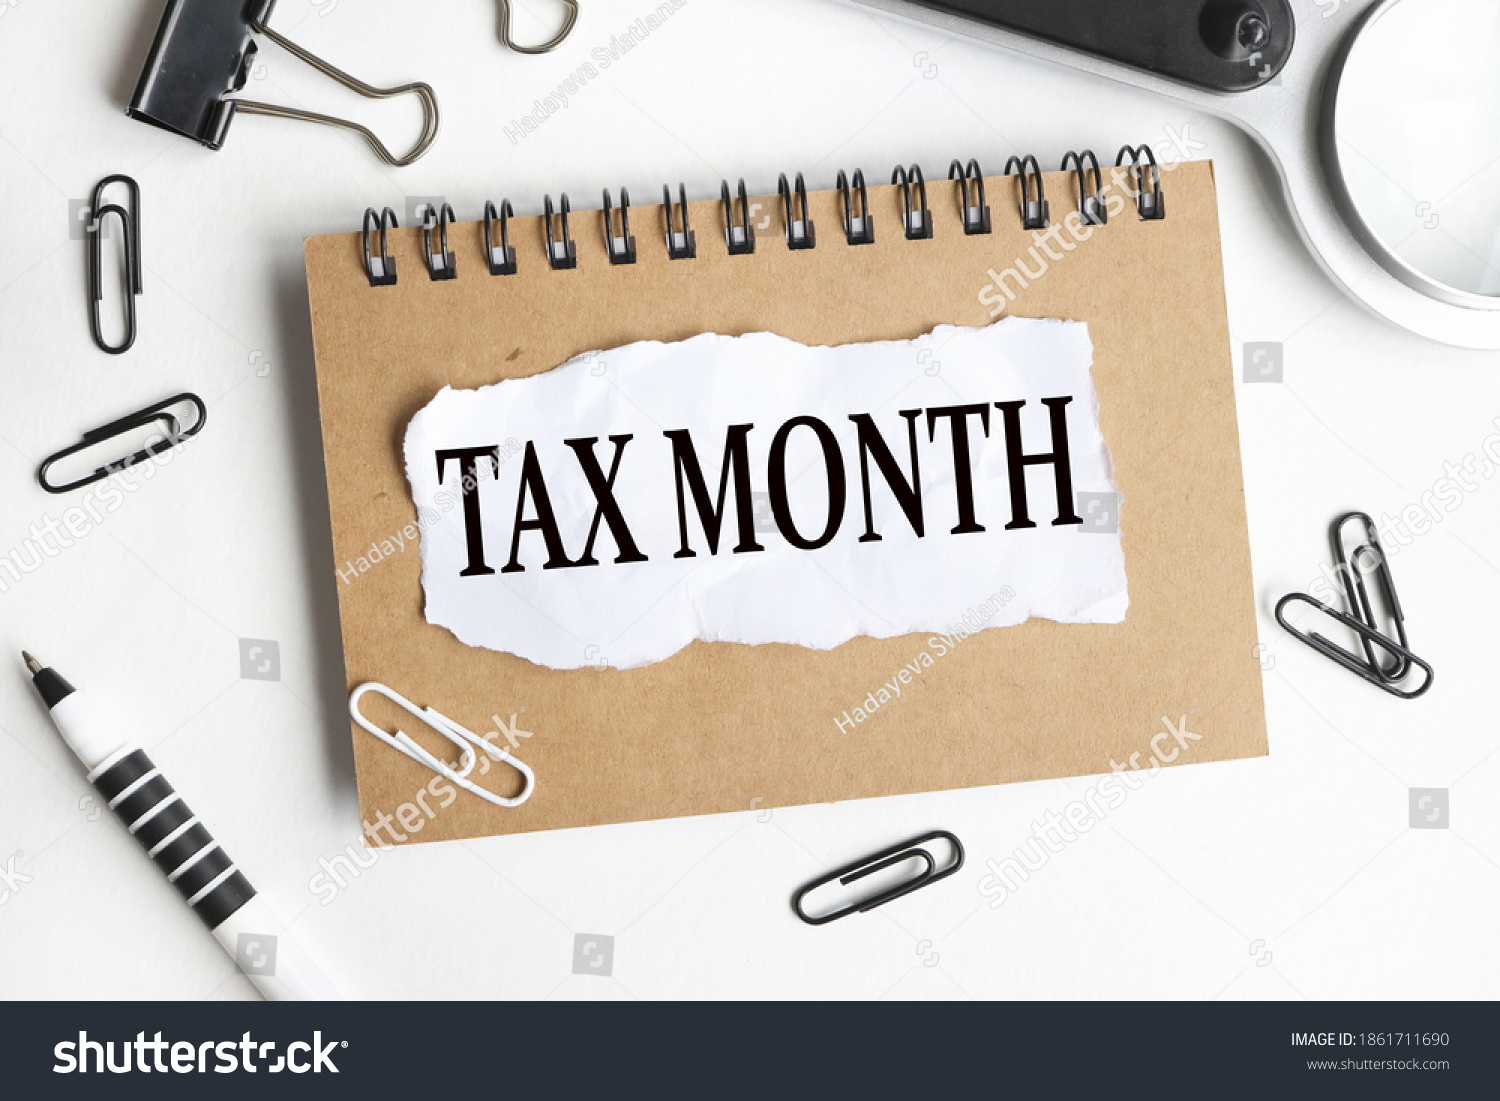 TAX MONTH, text on white paper on white background #1861711690